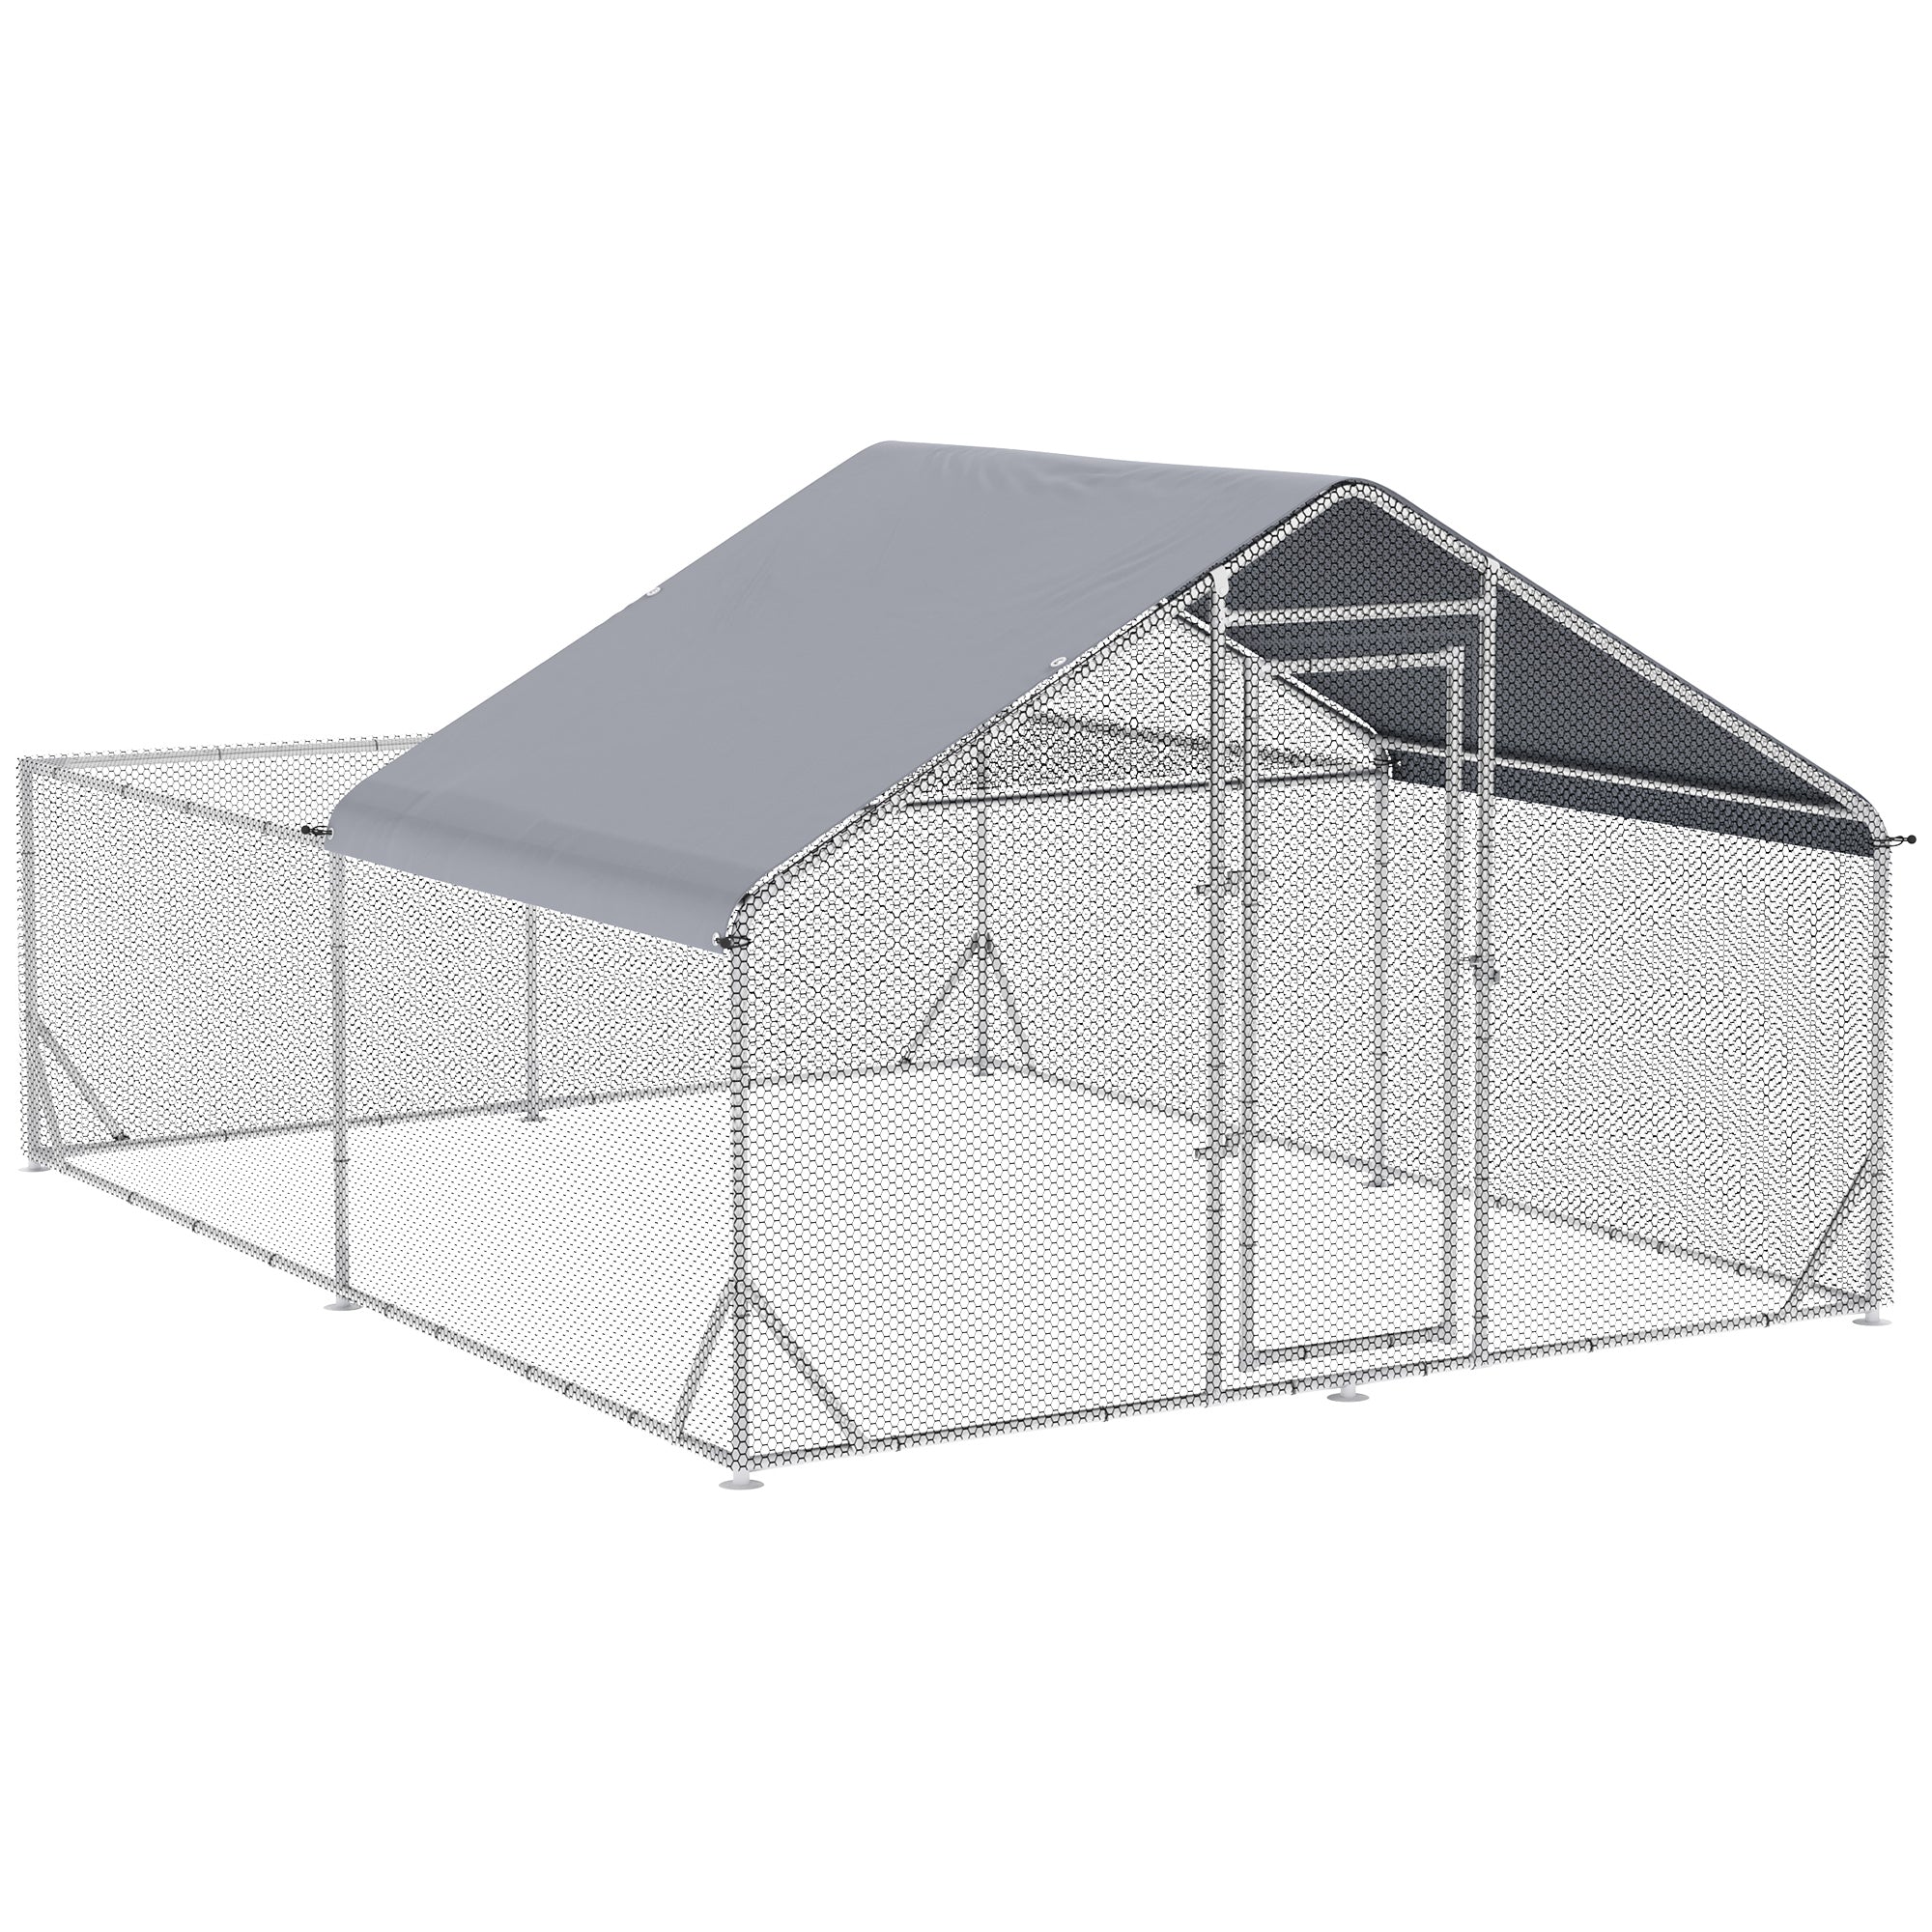 Spacious Walk-In Chicken Run with Protective Roof, PawHut,